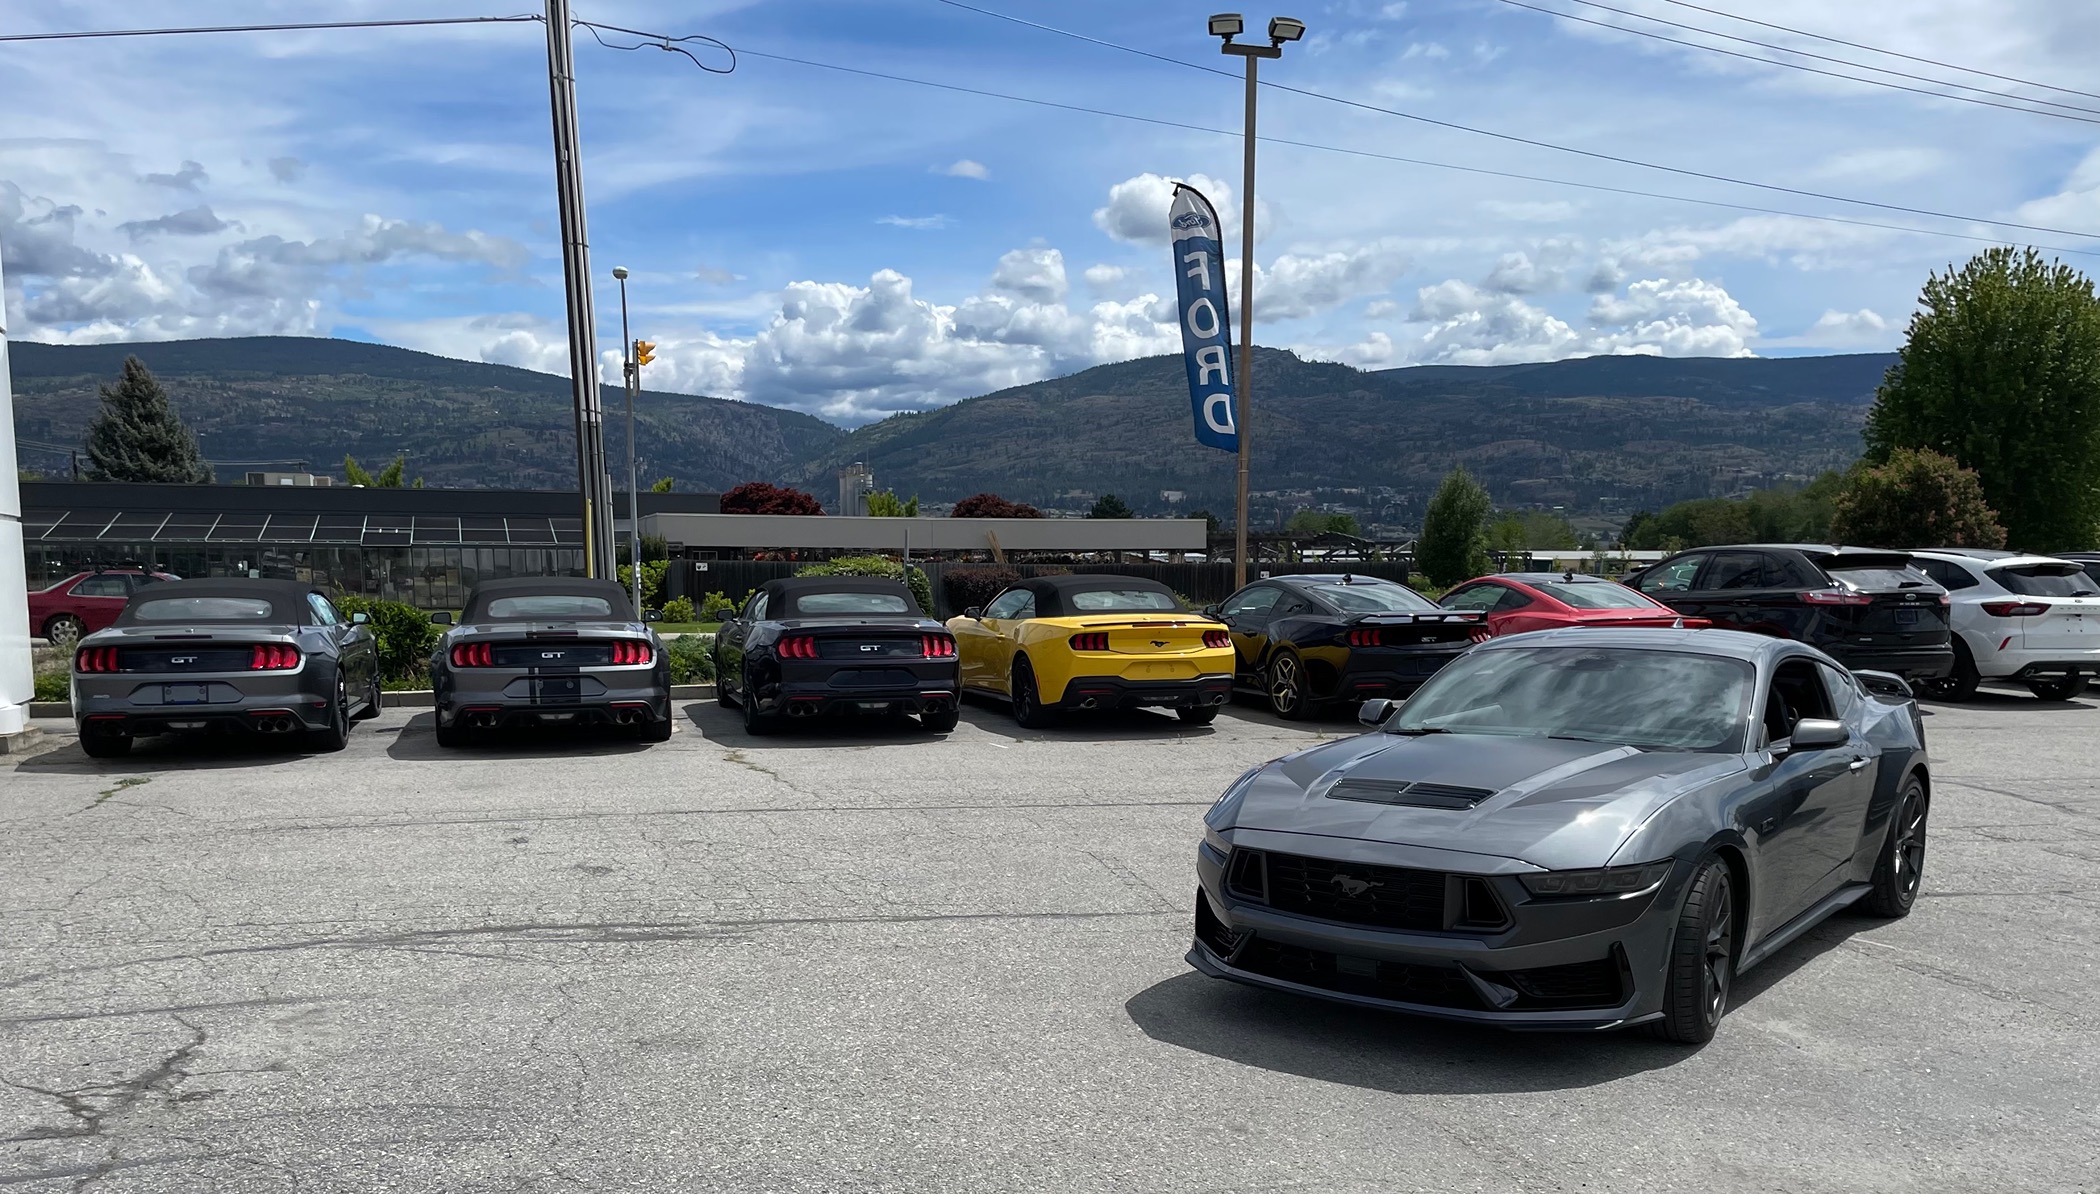 S650 Mustang Show off your stang! 74141BC0-AFFC-488F-9F0E-855CD50CC706